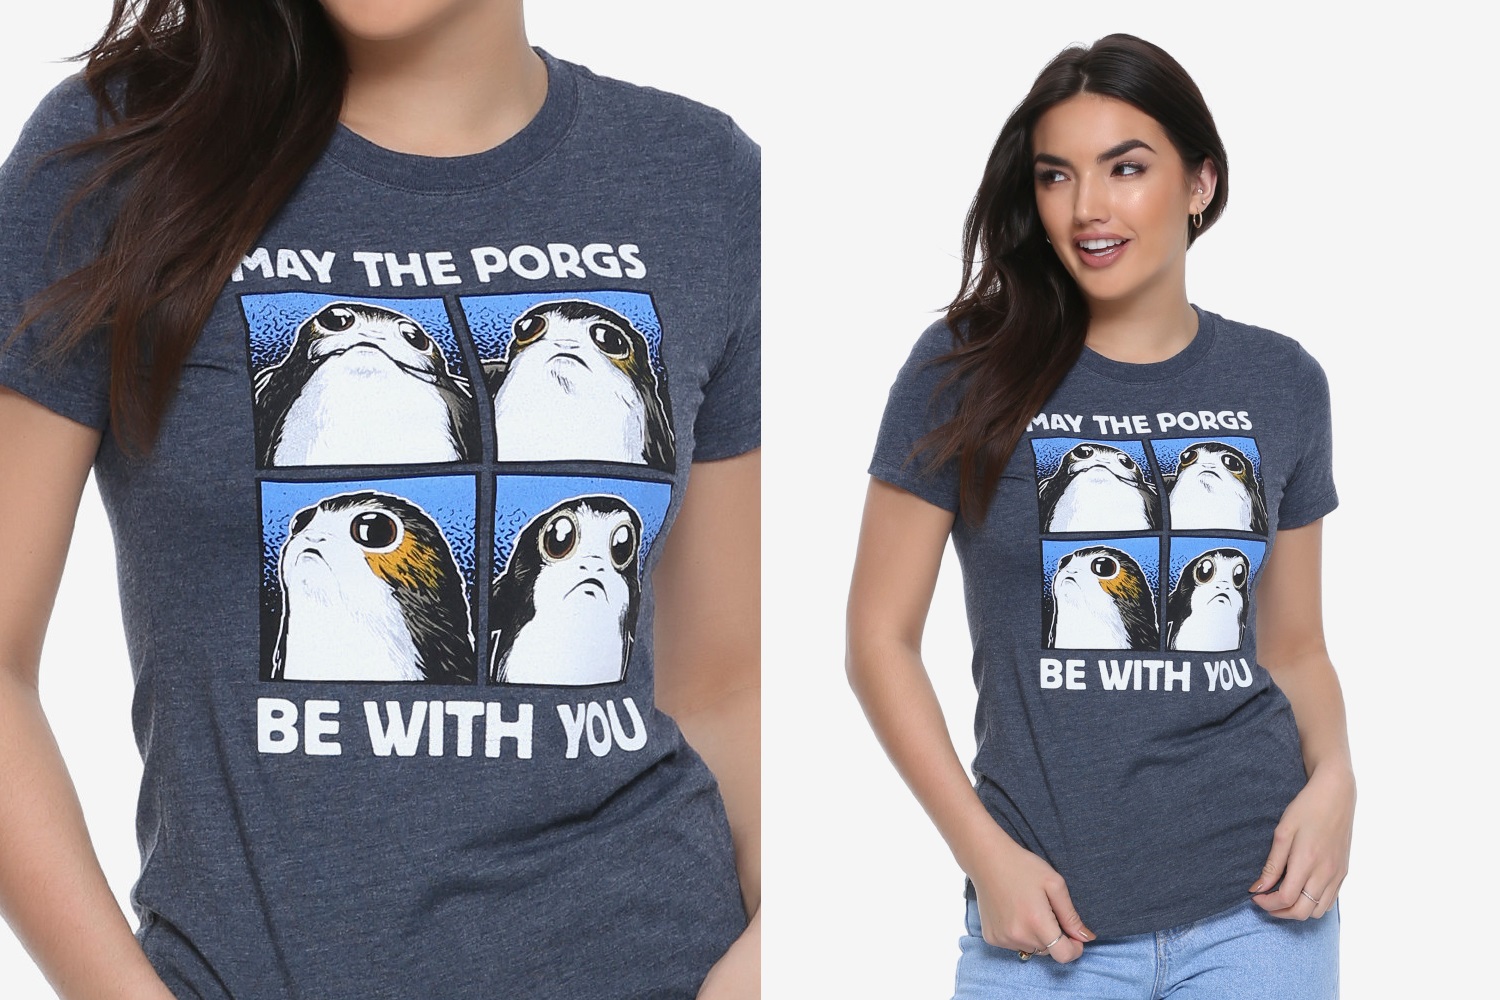 Women's Star Wars The Last Jedi May The Porgs Be With You t-shirt available exclusively at Box Lunch